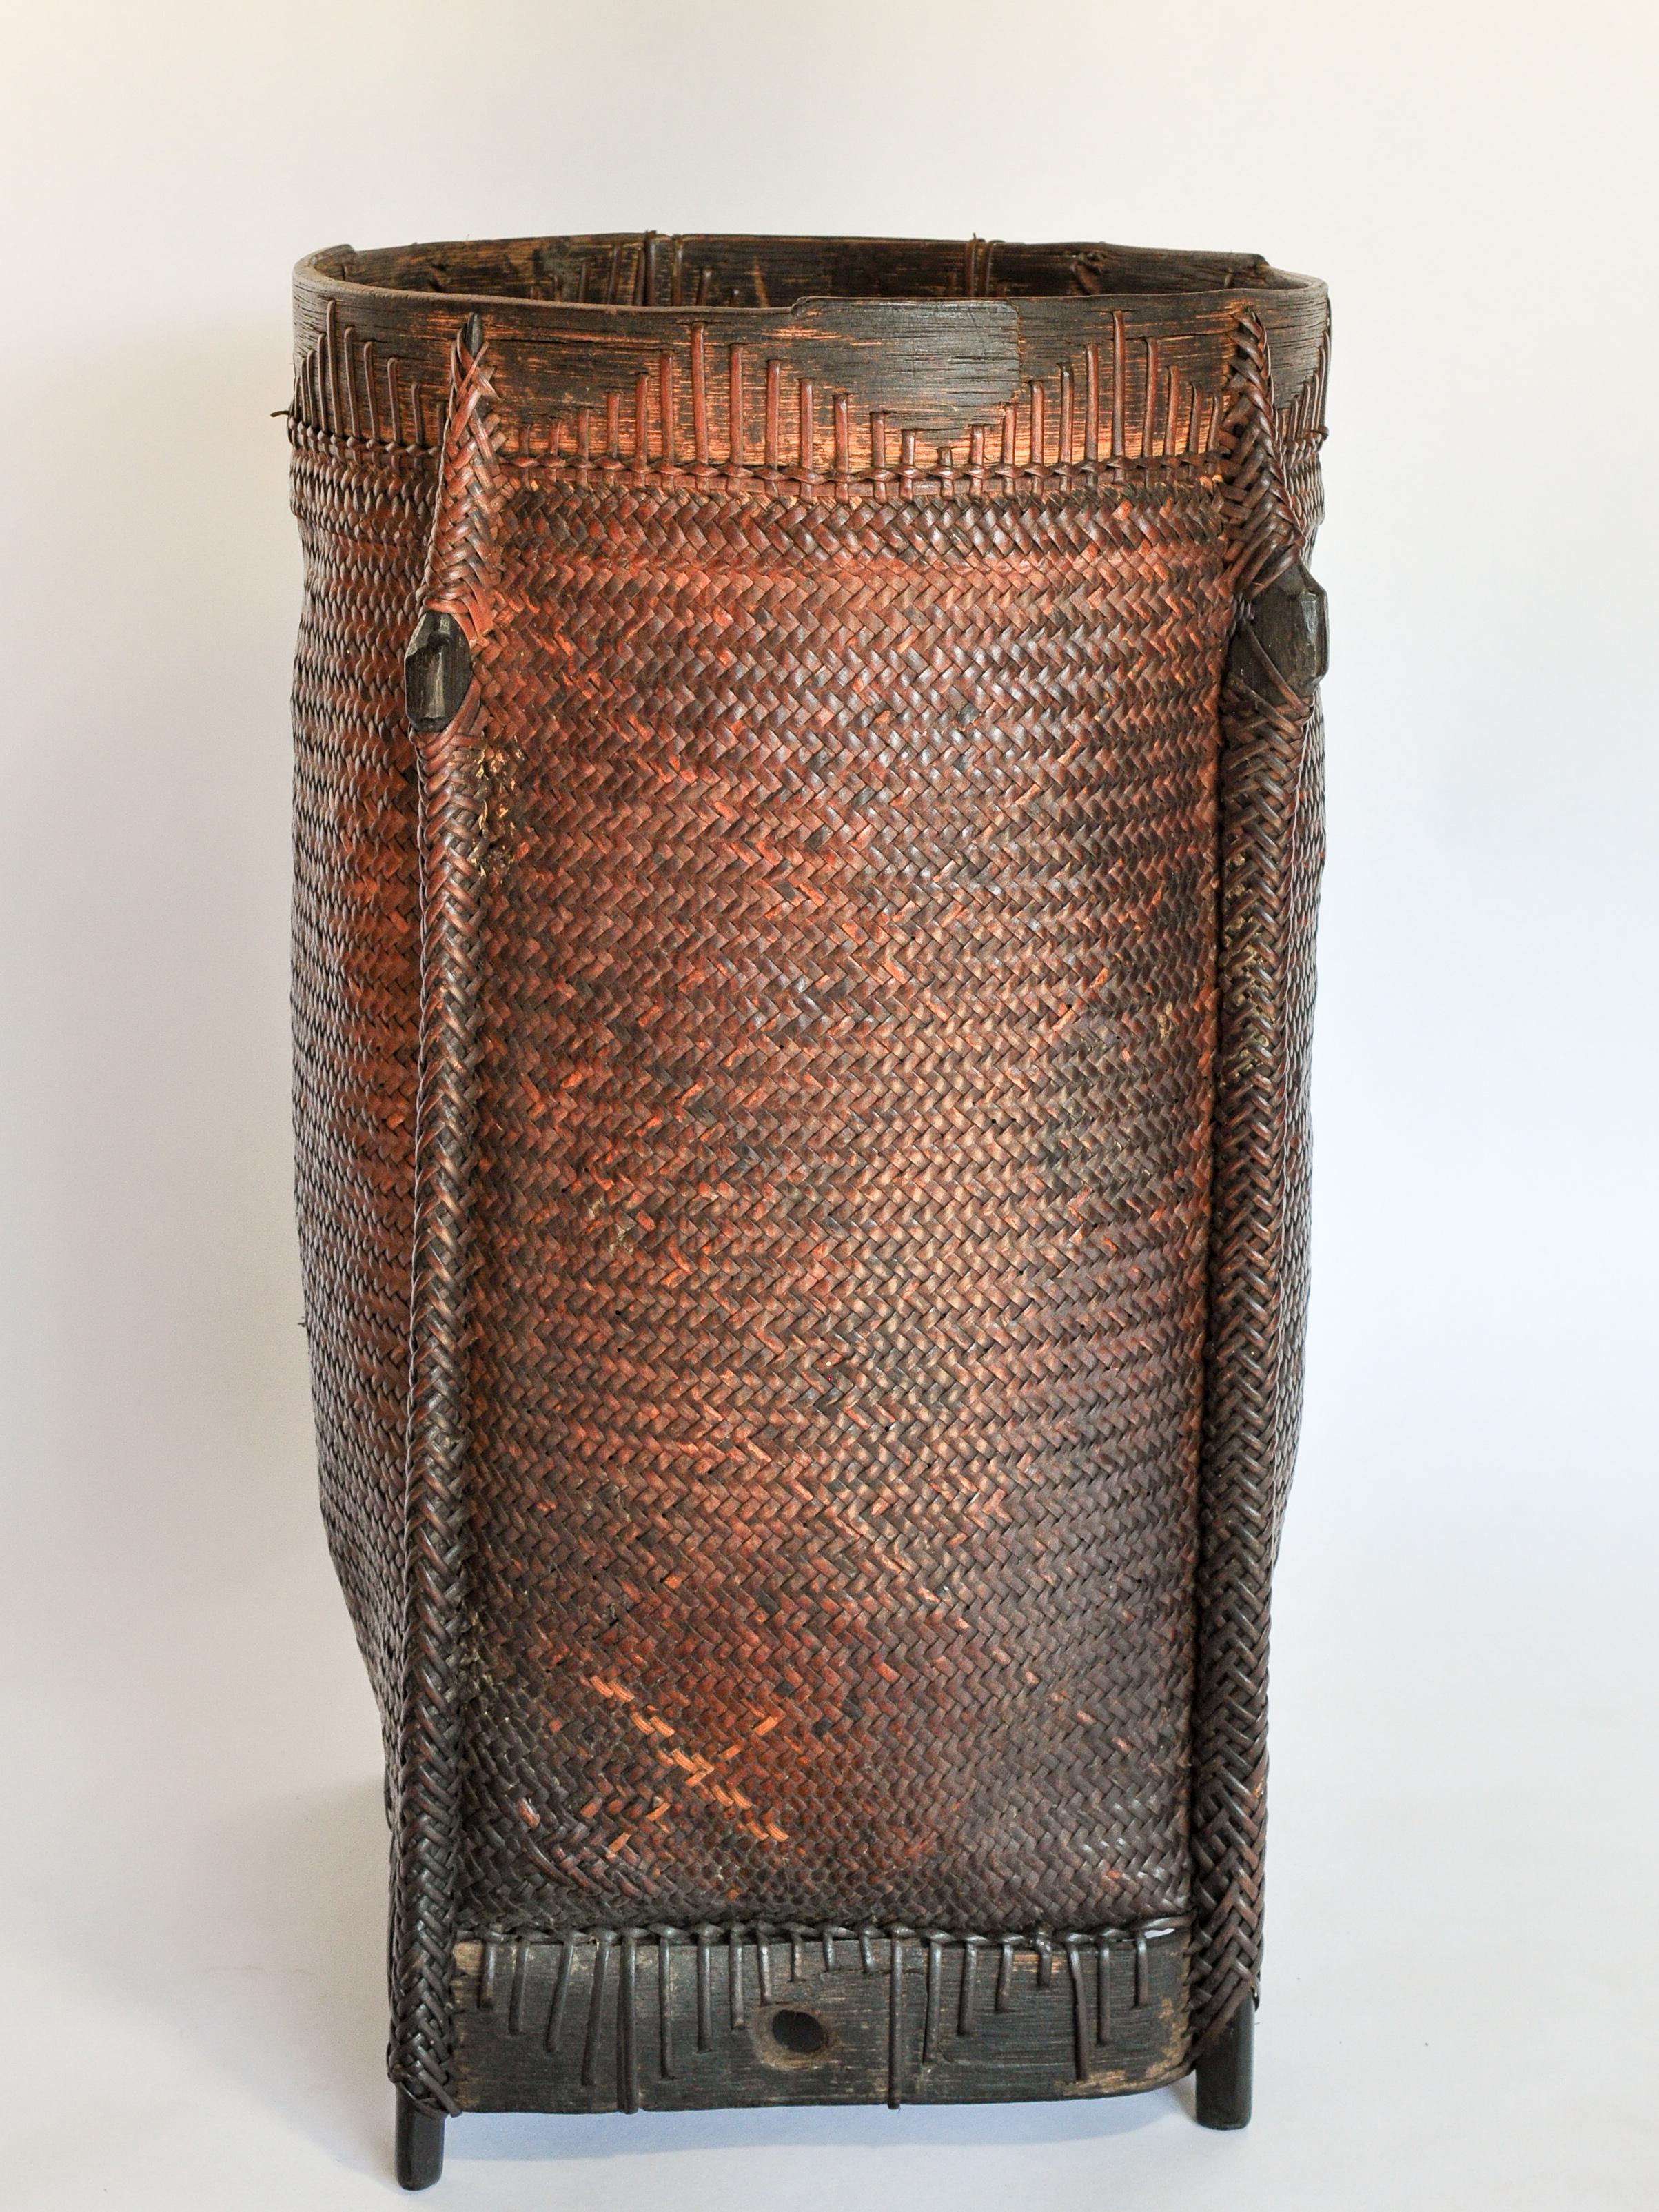 Indonesian Tribal Carrying and Storage Basket from Borneo, Mid-20th Century